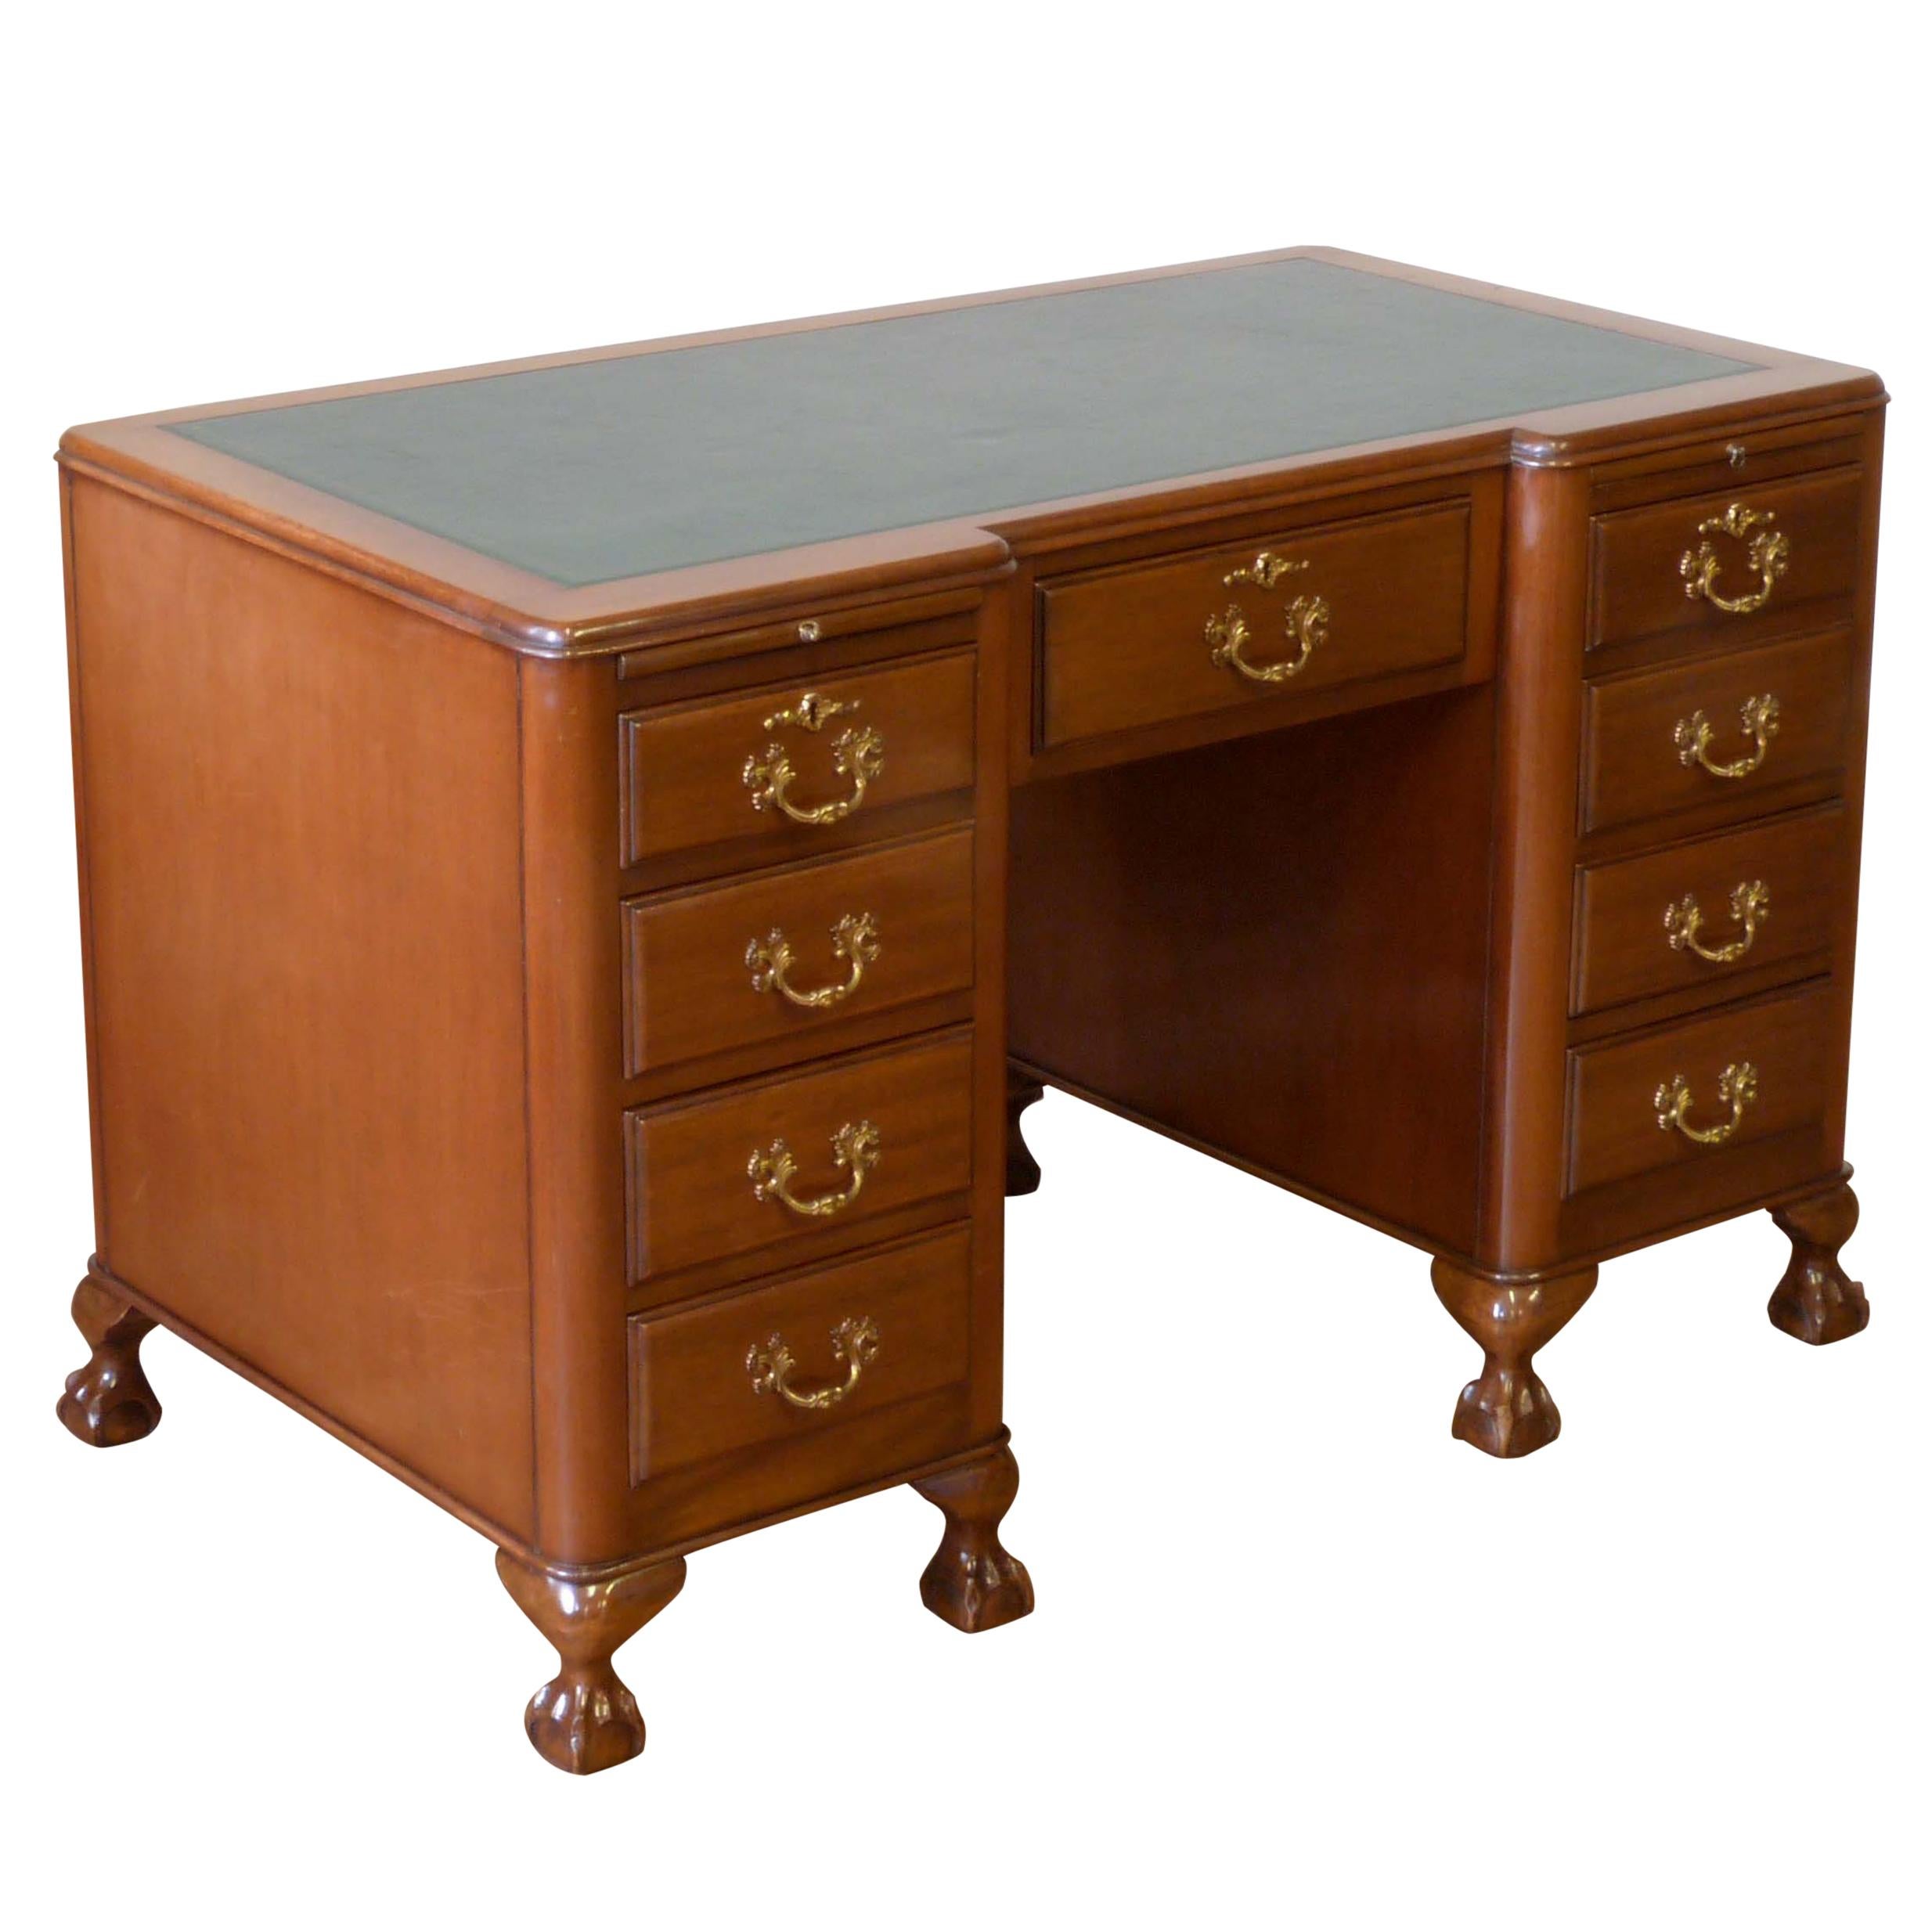 Early 20th Century Mahogany Kneehole Desk For Sale